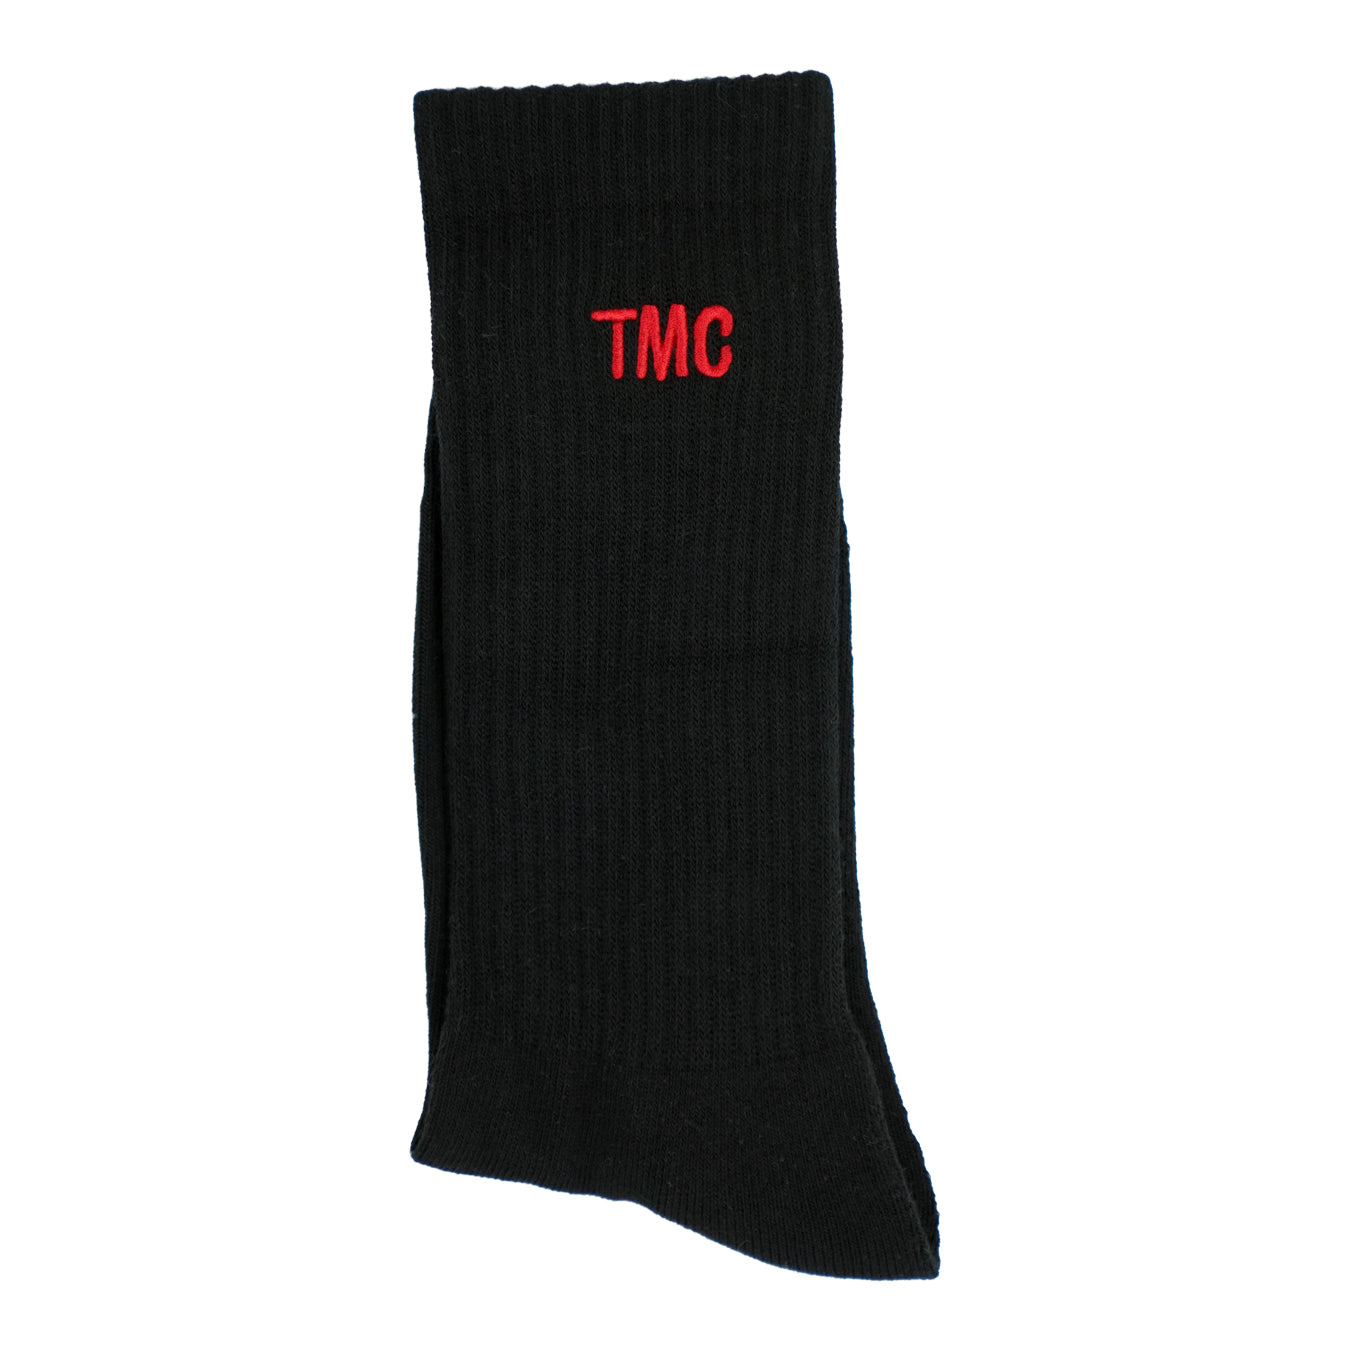 TMC (Embroidered) Sock - Black/Red